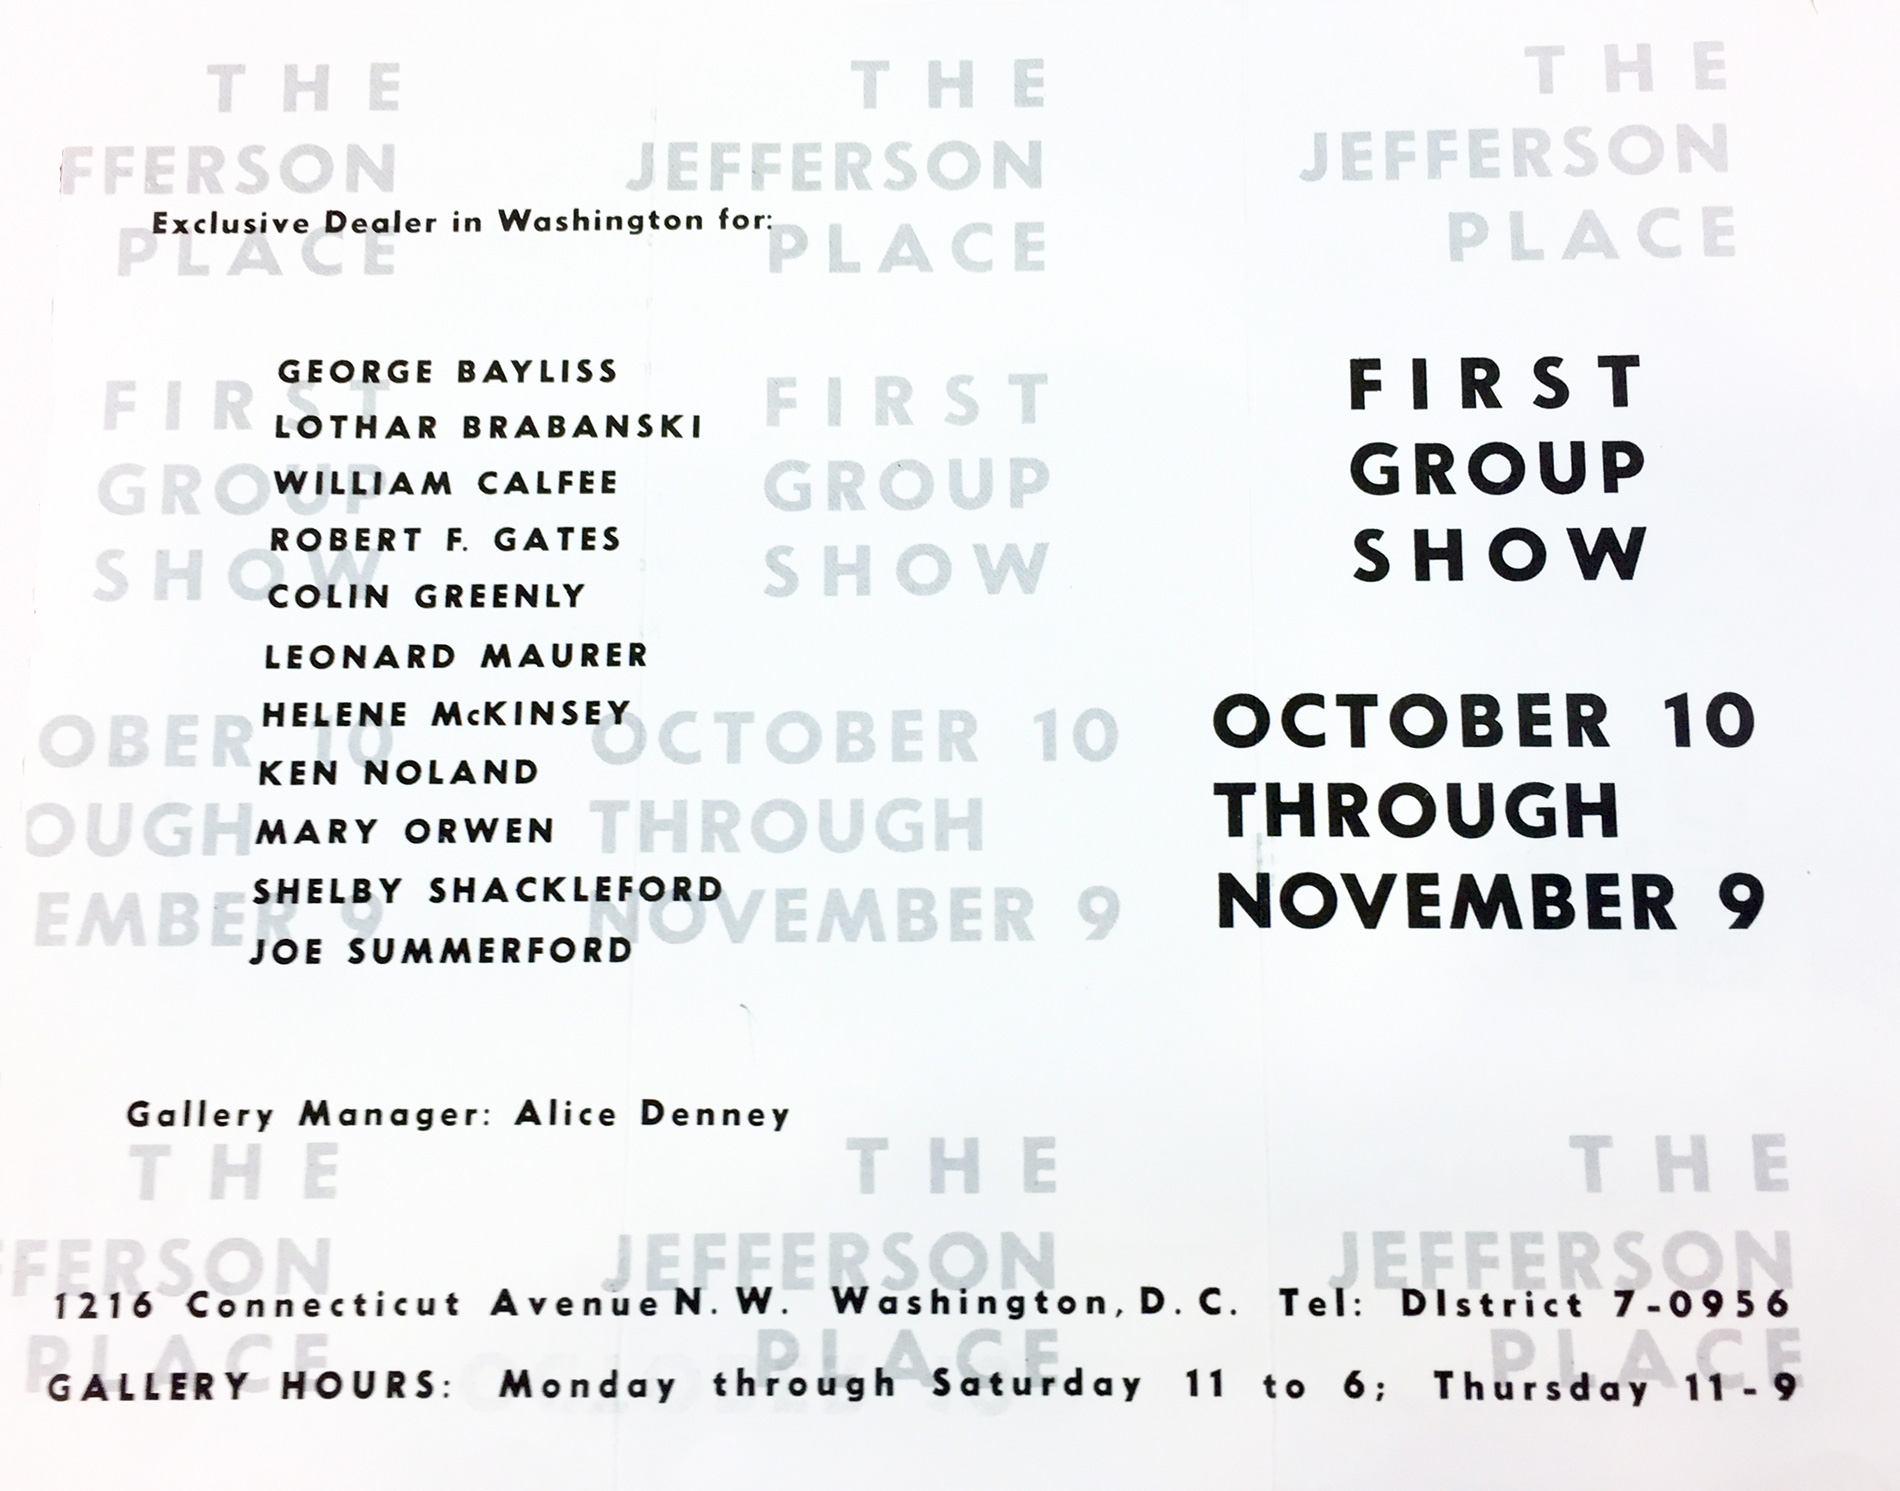 Announcement Card for the First Group Show at Jefferson Place Gallery